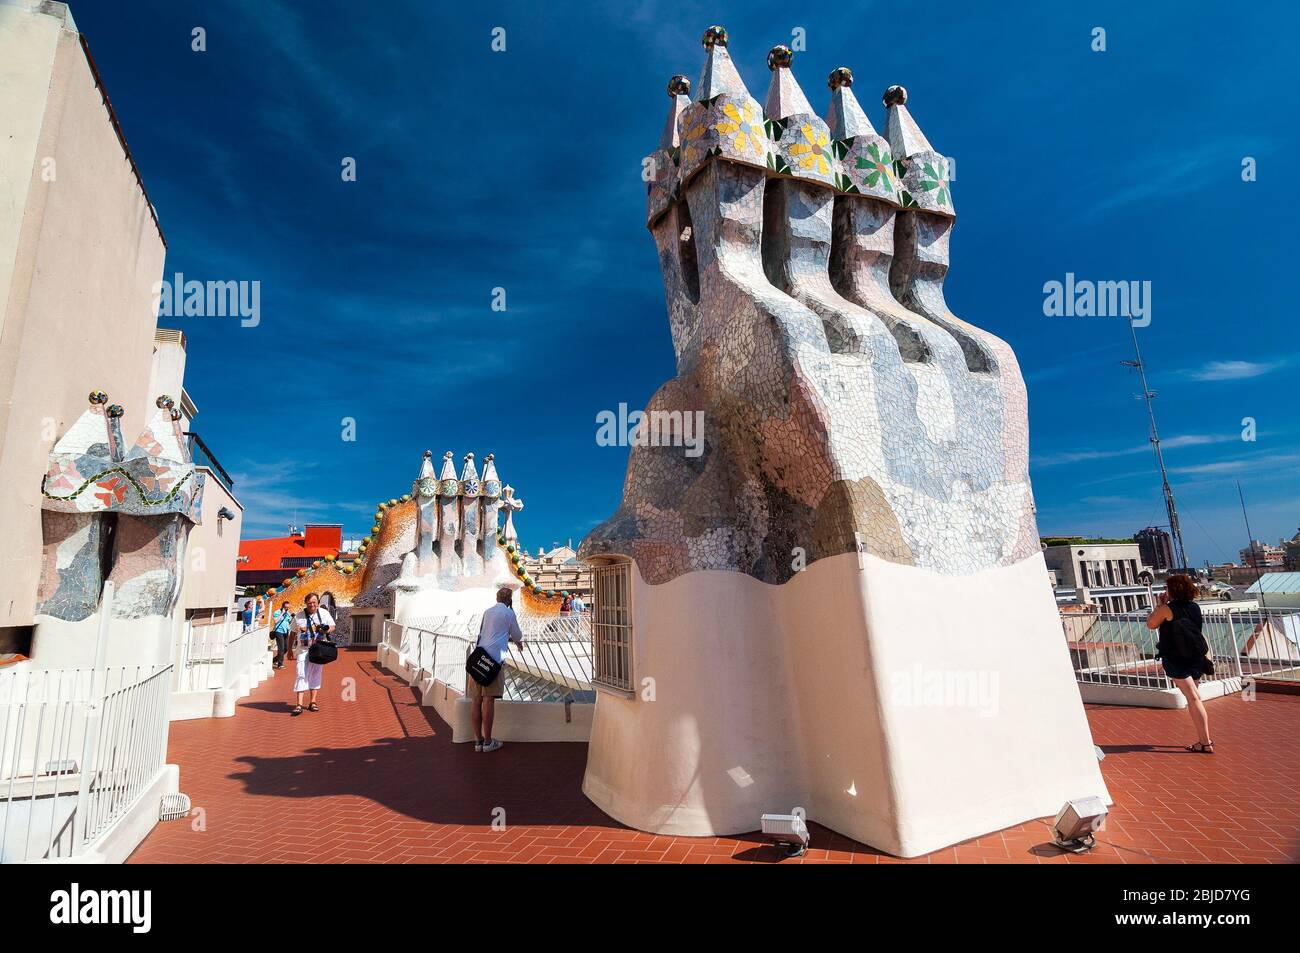 Barcelona, Spain - September 19, 2014: Rooftop of the house Casa Batllo - House of Bones designed by Antoni Gaudi. Ceramic tiles, with tower and bulb. Stock Photo